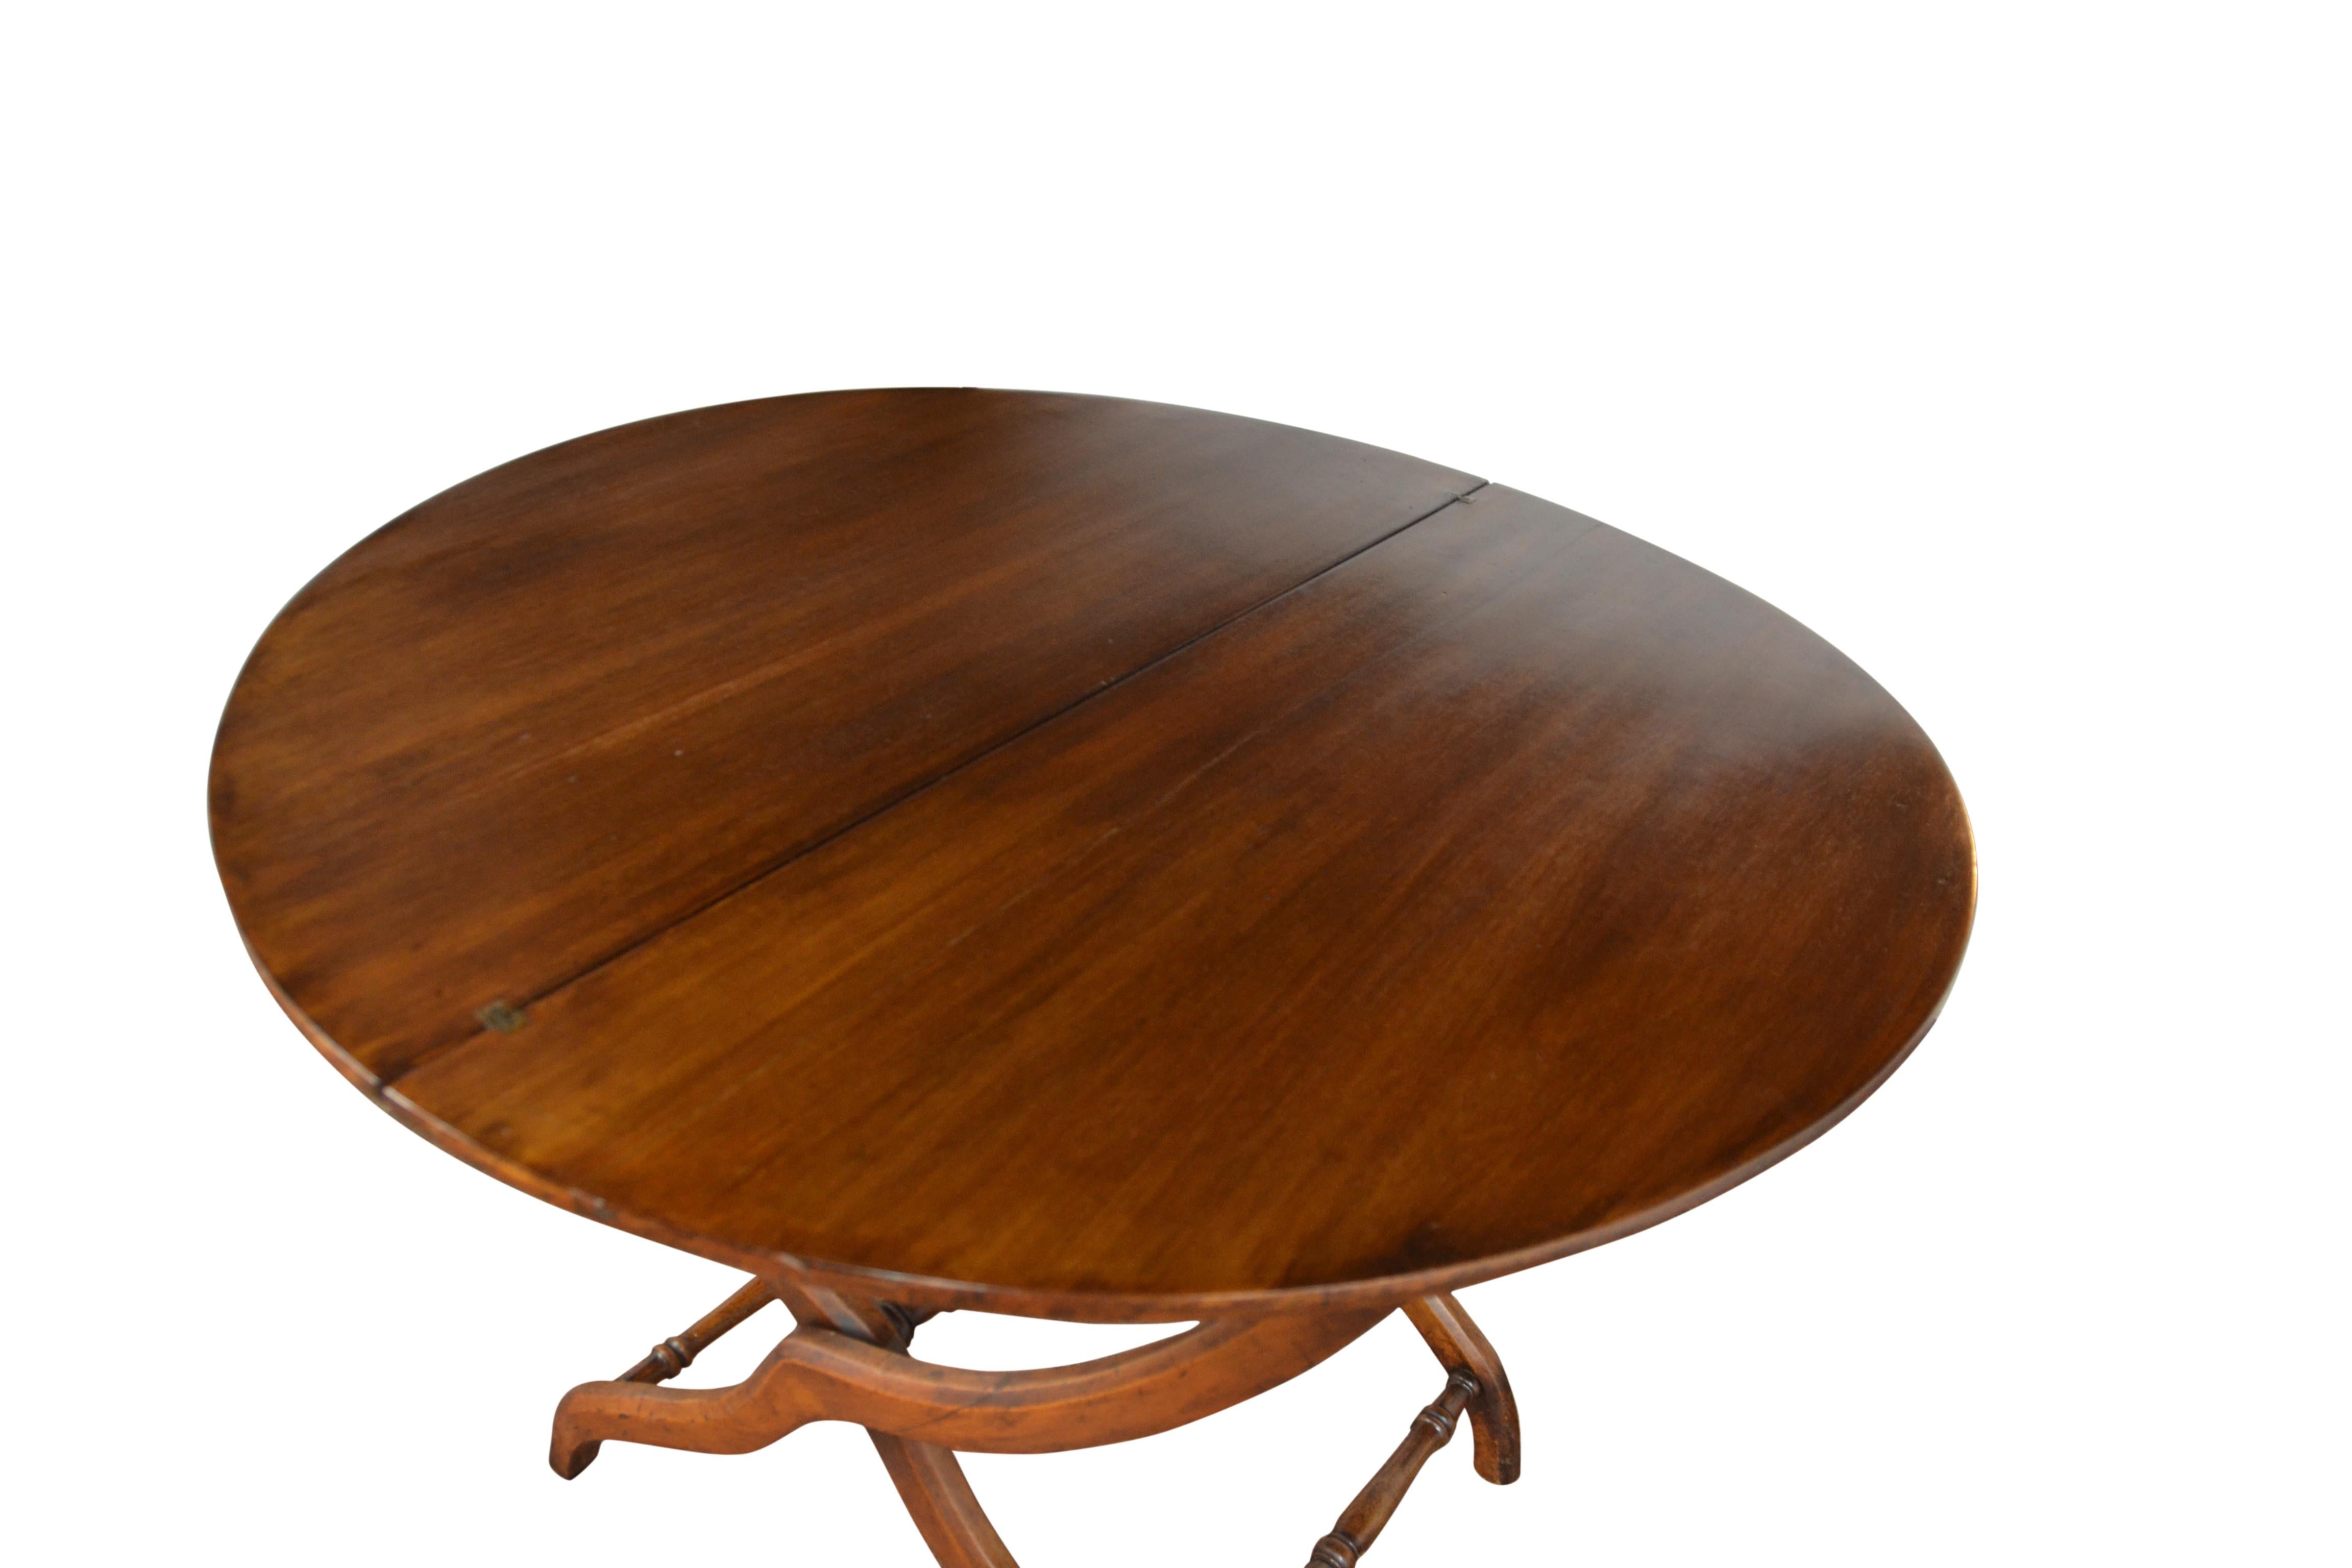 A Campaign style round table with an unusual folding mechanism. Makes a nice smaller size dining table or game table.